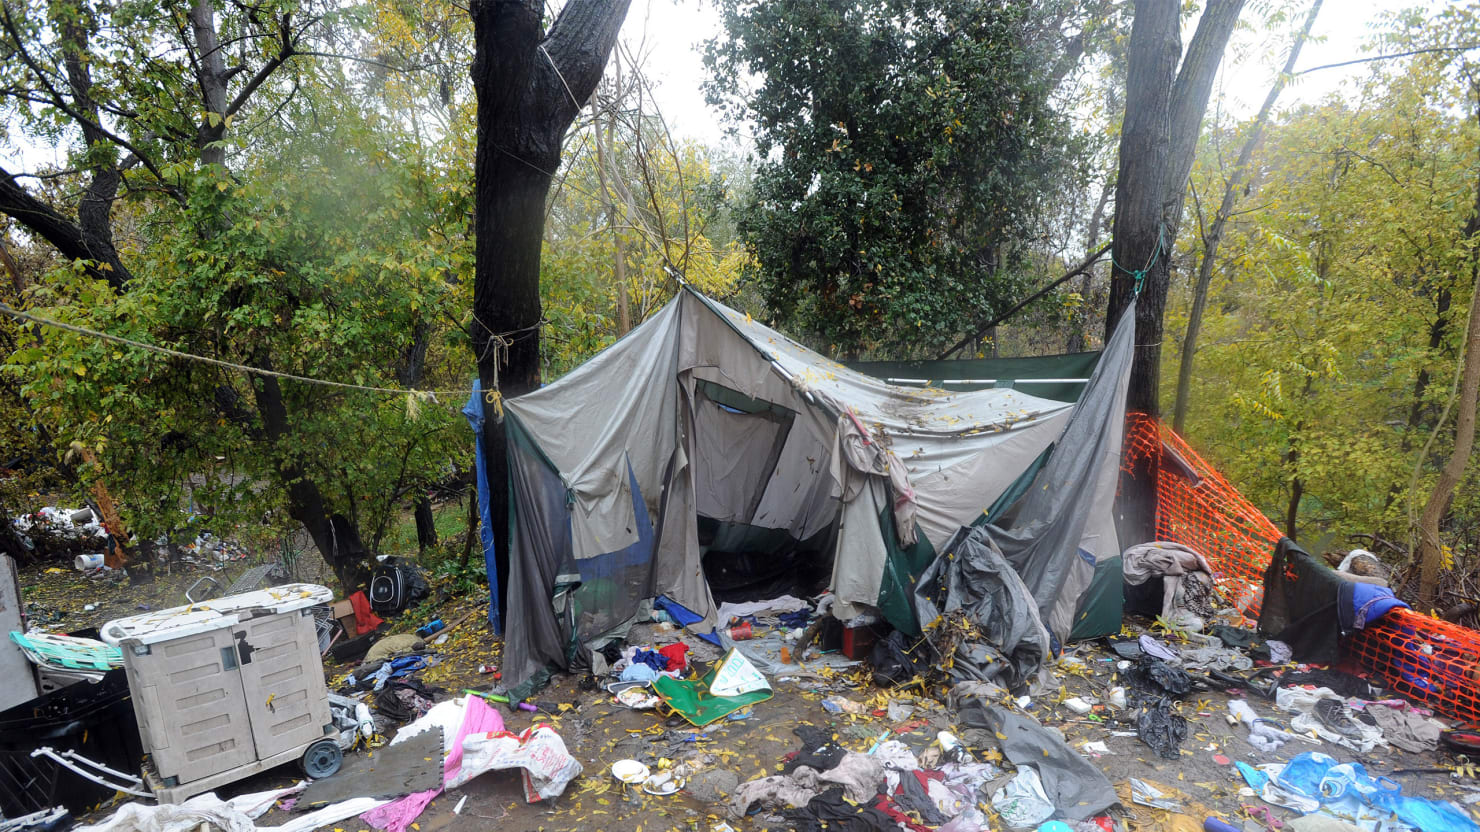 Largest U.S. Homeless Camp Dismantled1480 x 832